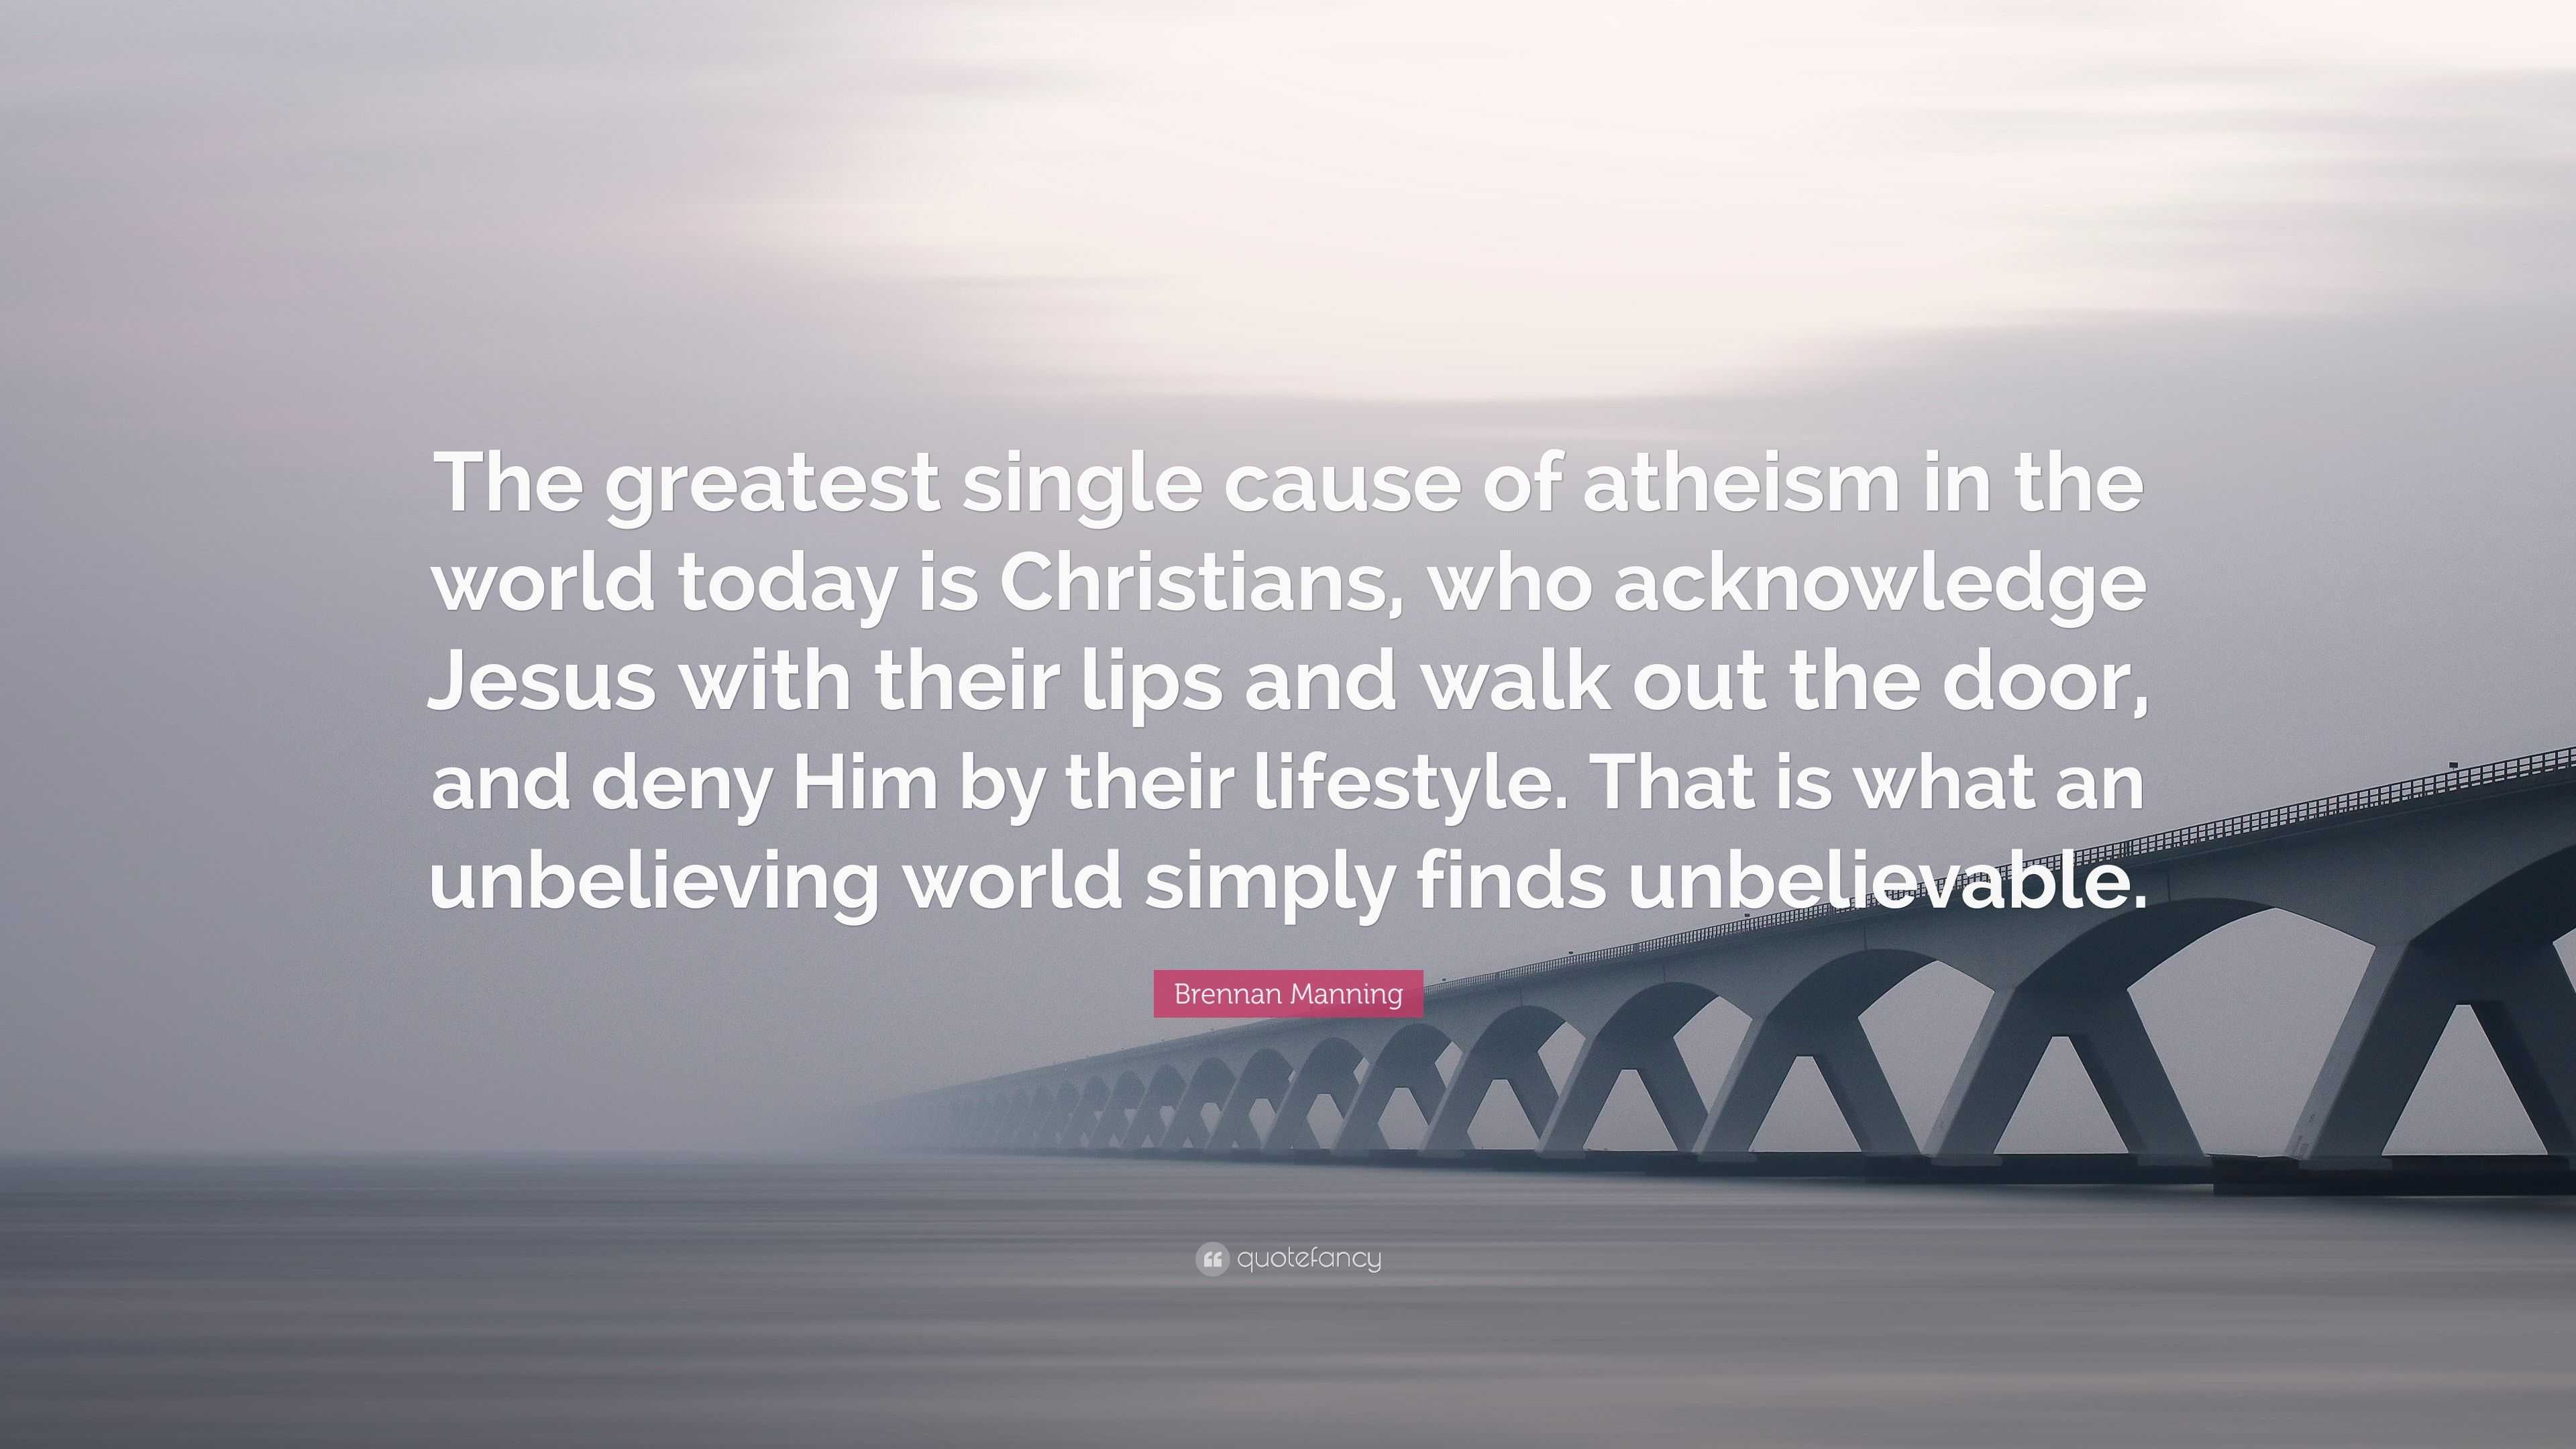 Brennan Manning Quote: “The greatest single cause of atheism in the world  today is Christians, who acknowledge Jesus with their lips and walk ou”